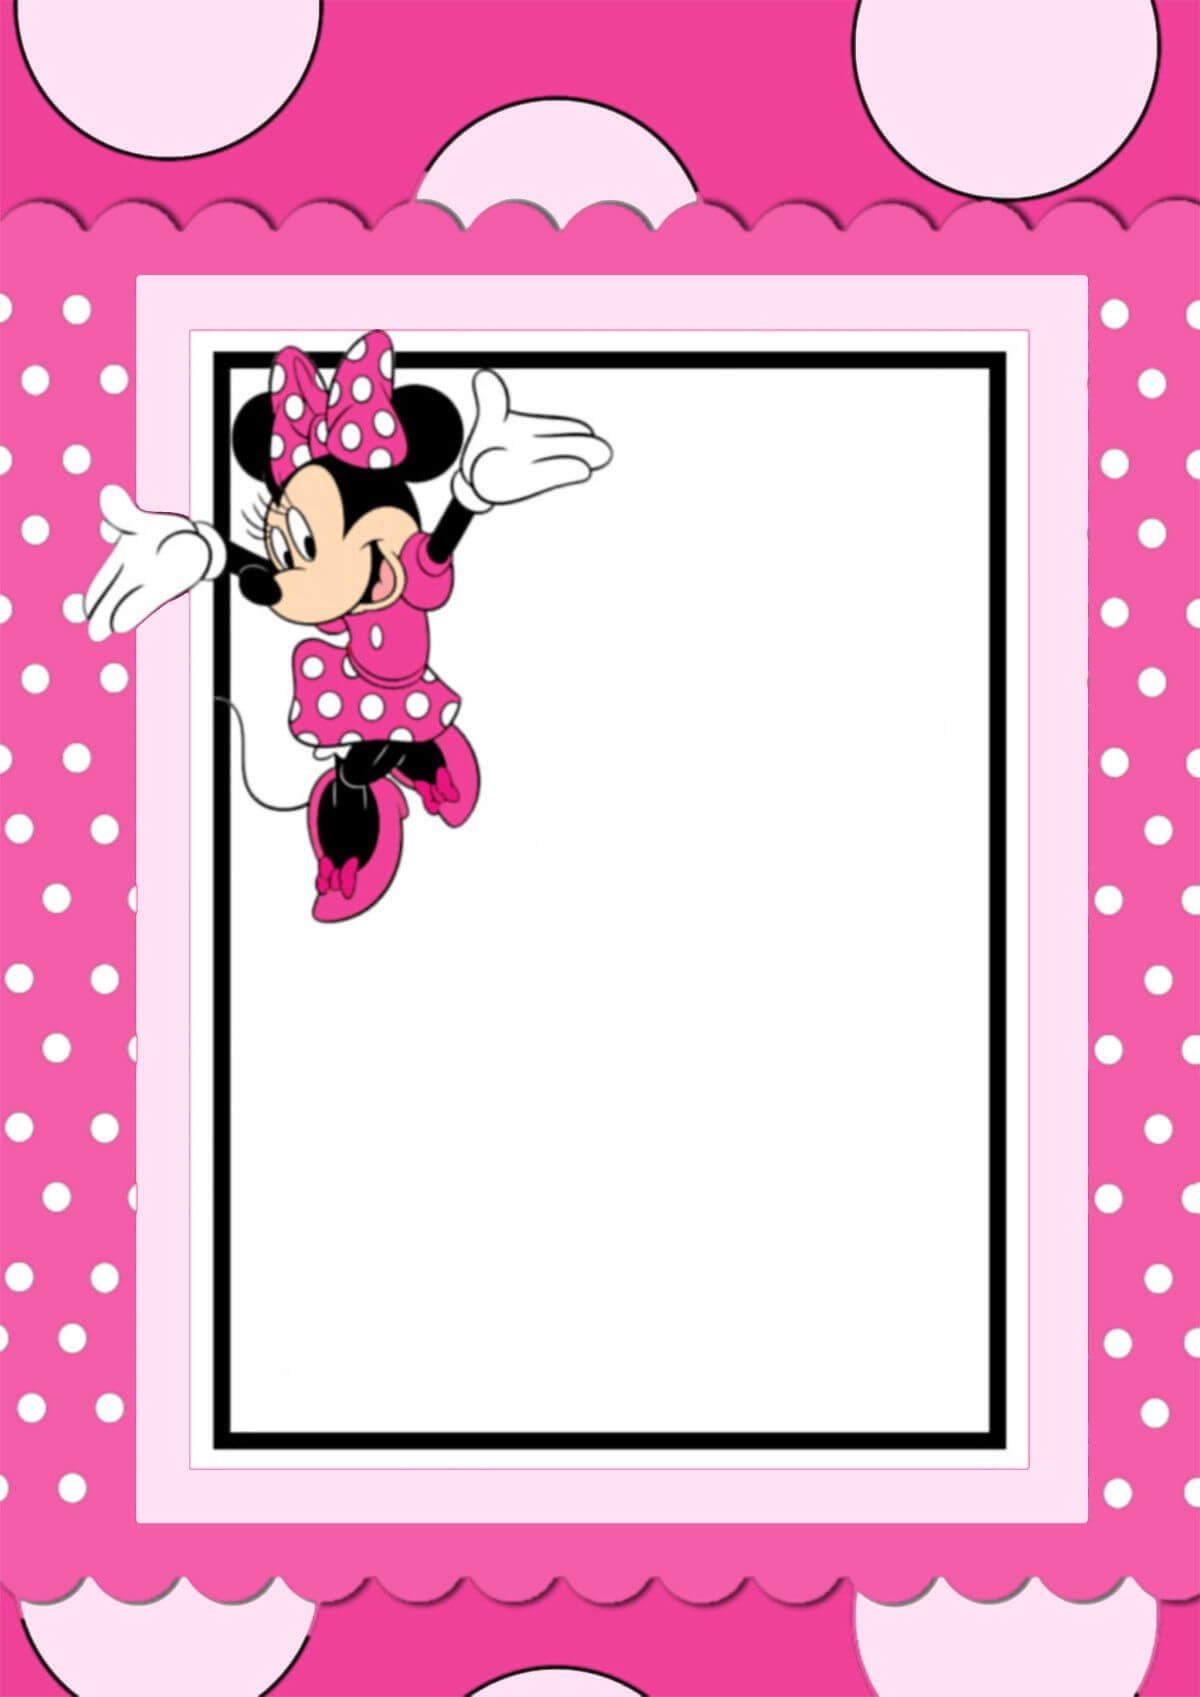 Free Printable Minnie Mouse Invitation Card | Free Throughout Minnie Mouse Card Templates